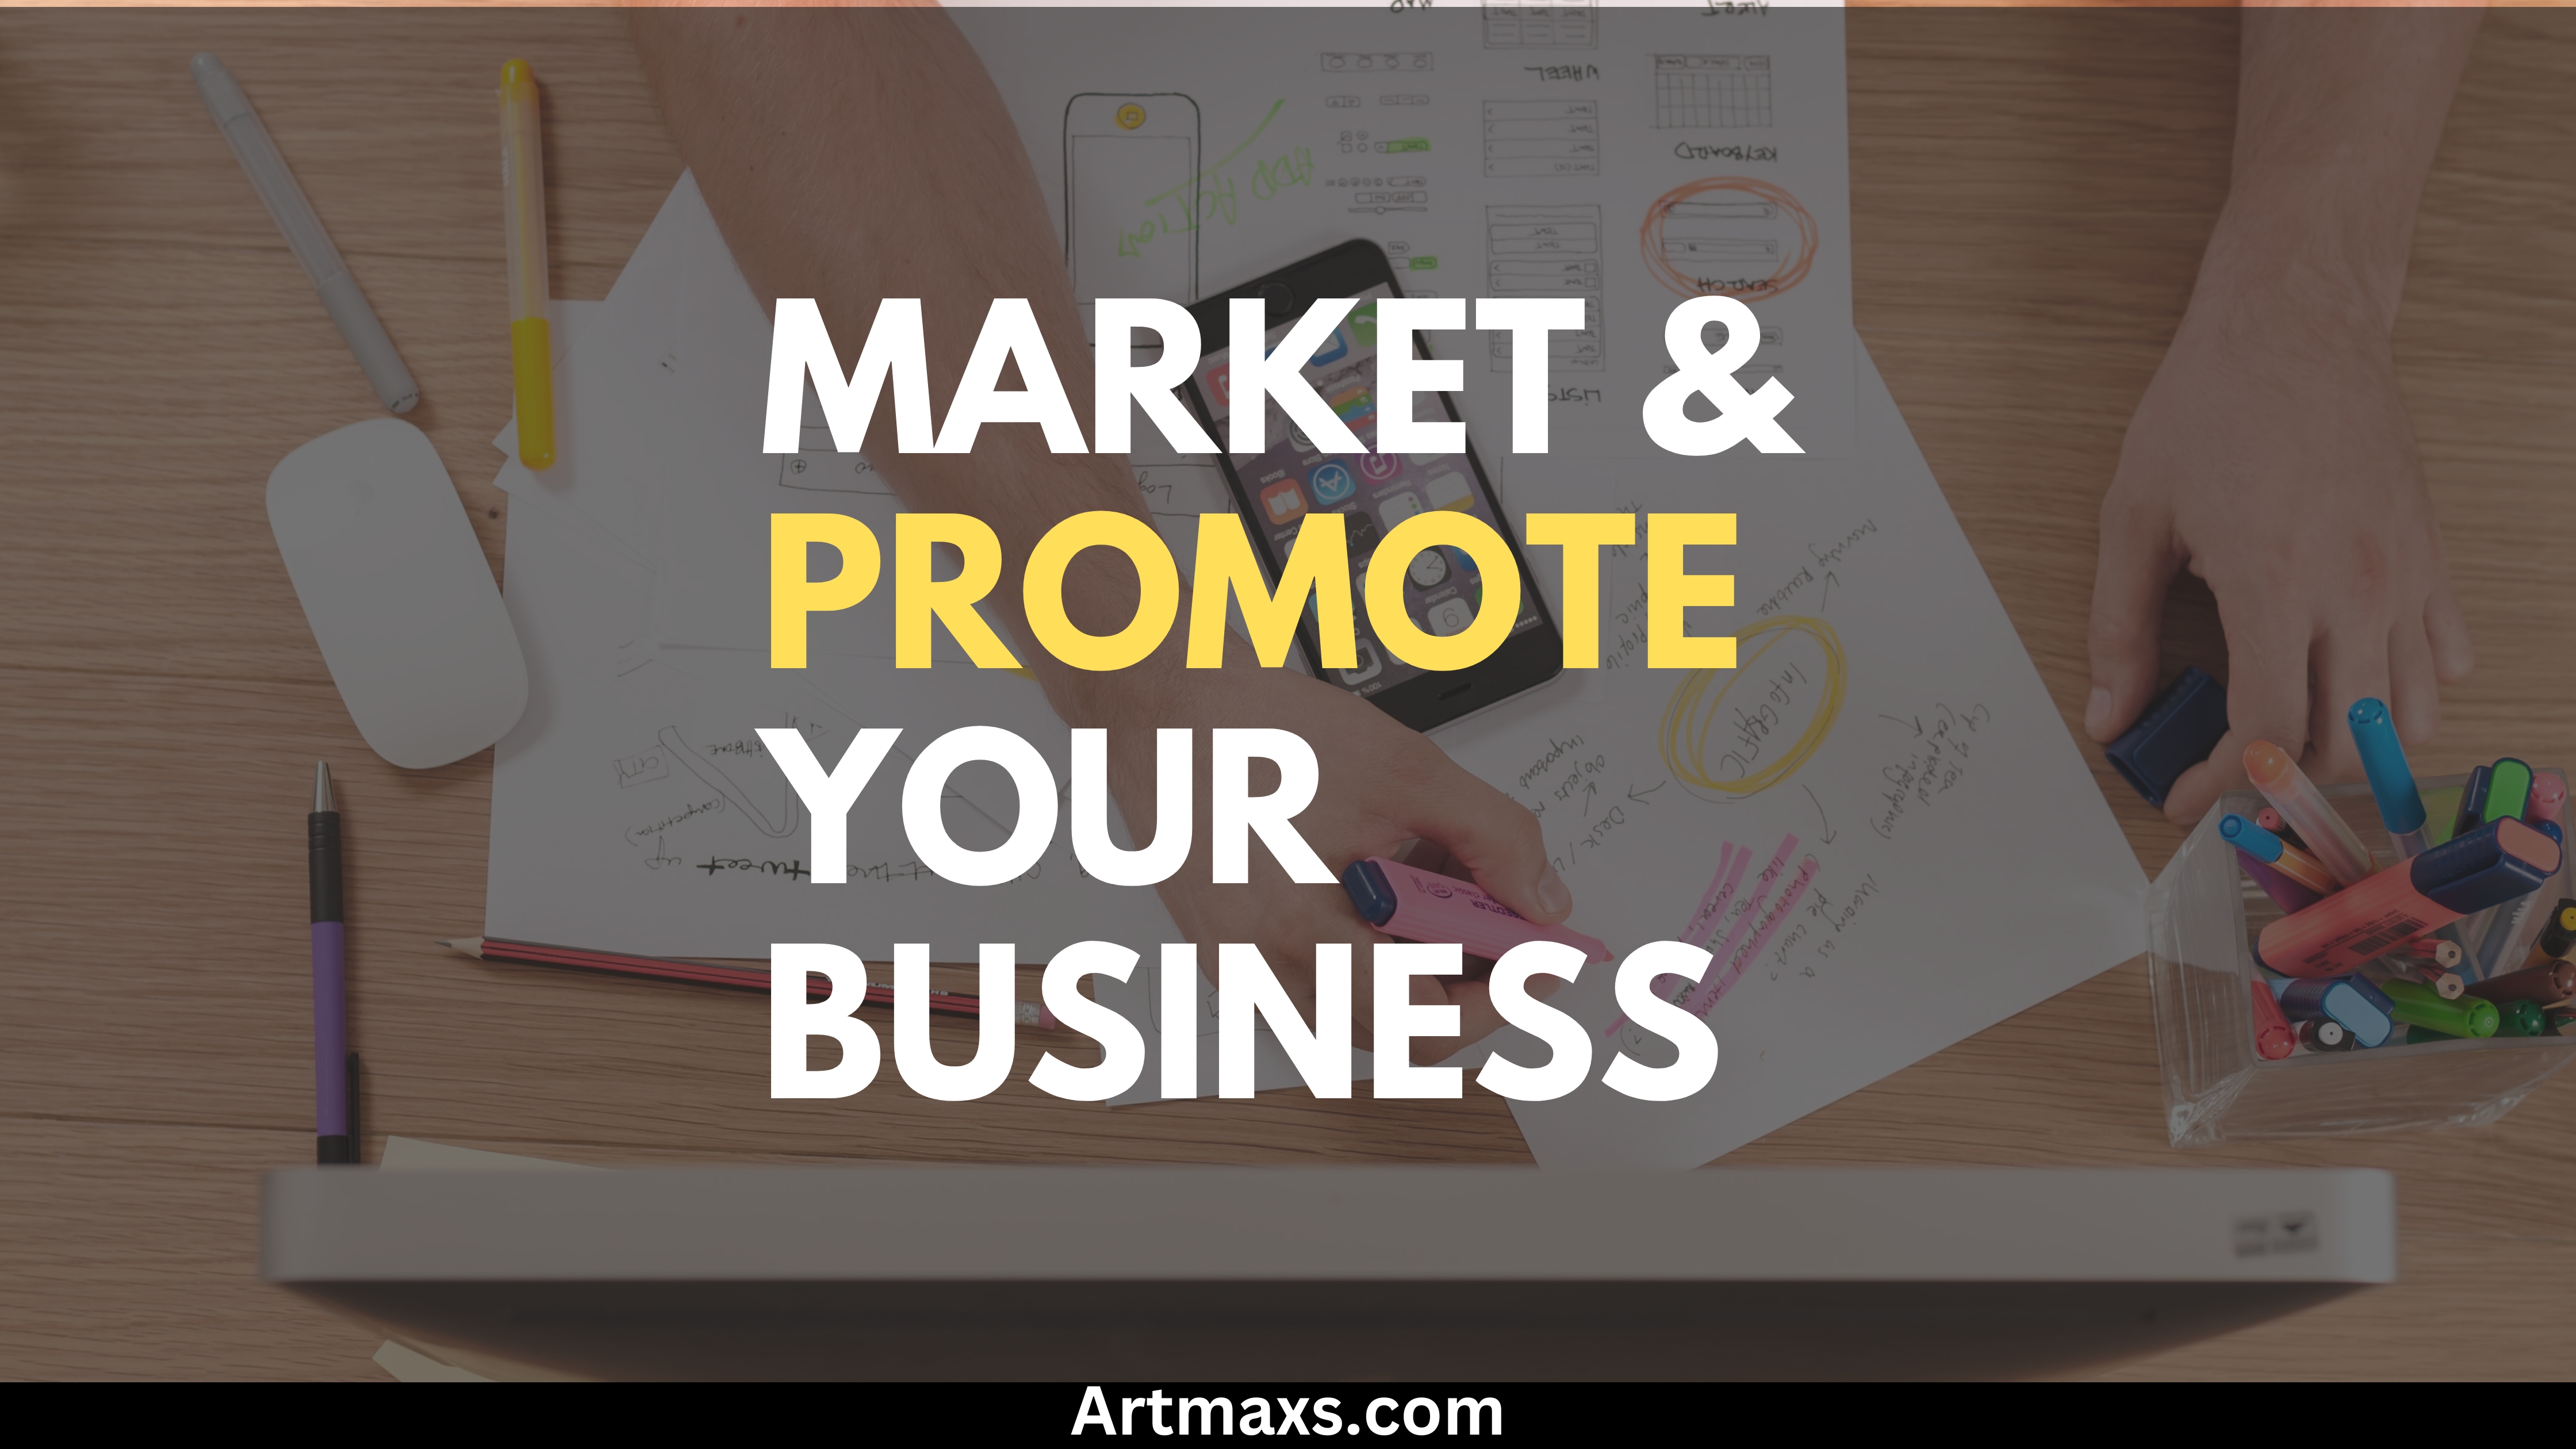 Market & Promote Your Business